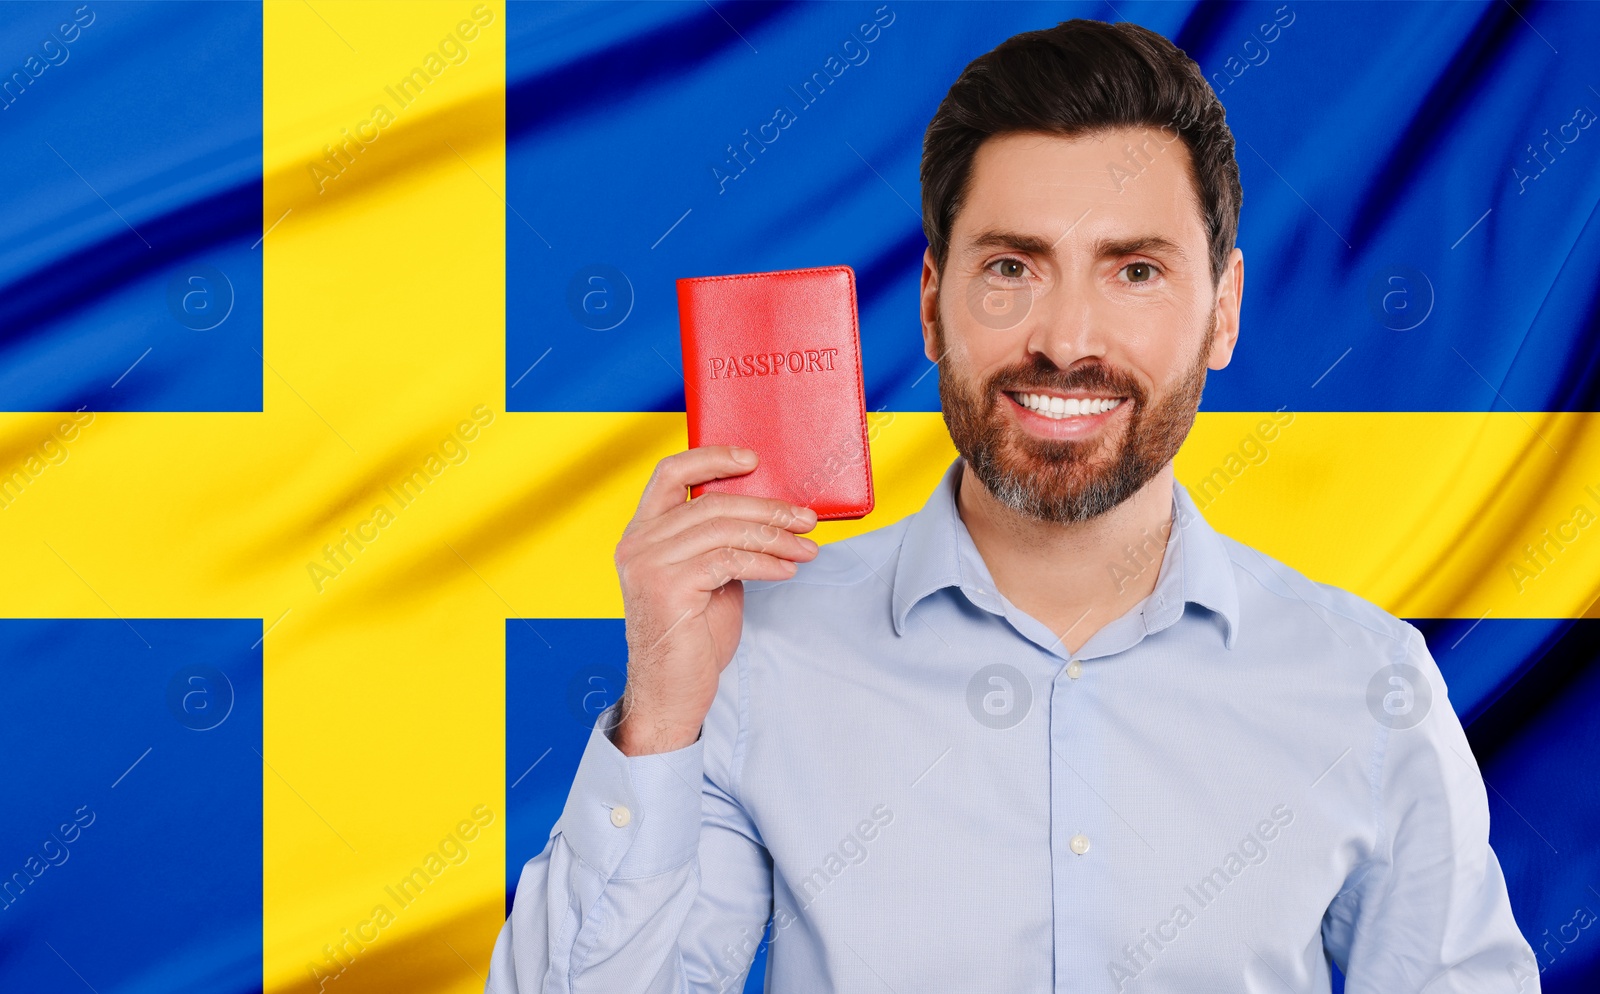 Image of Immigration. Happy man with passport against national flagSweden, space for text. Banner design